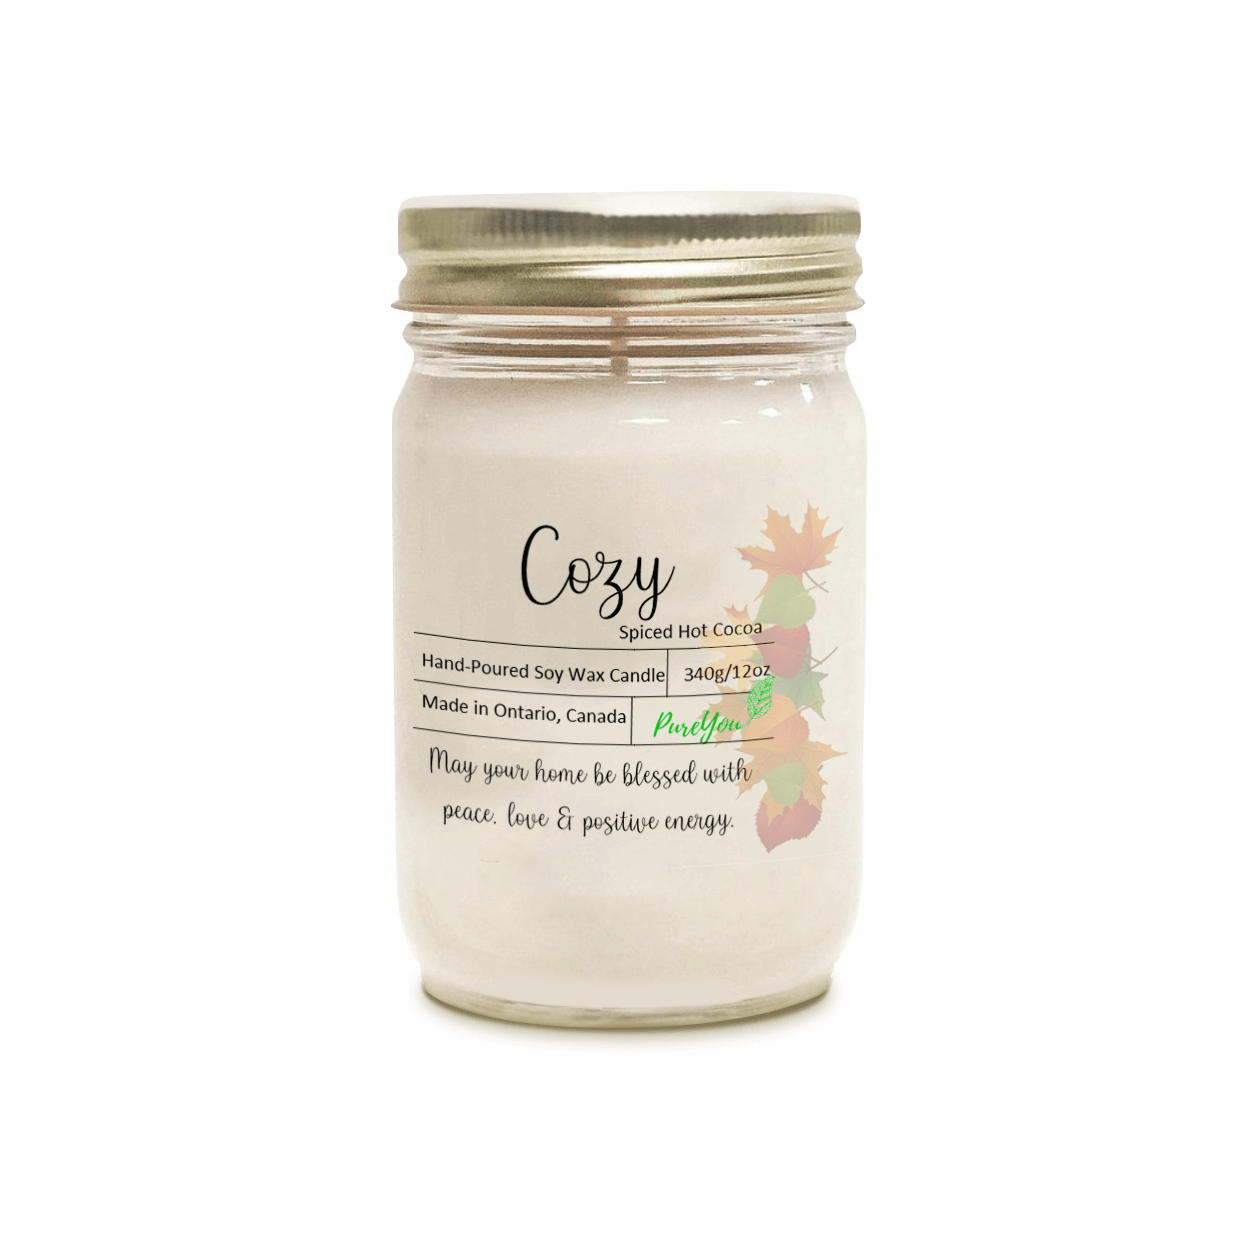 Cozy Soy Wax Candle (Spiced Hot Cocoa)